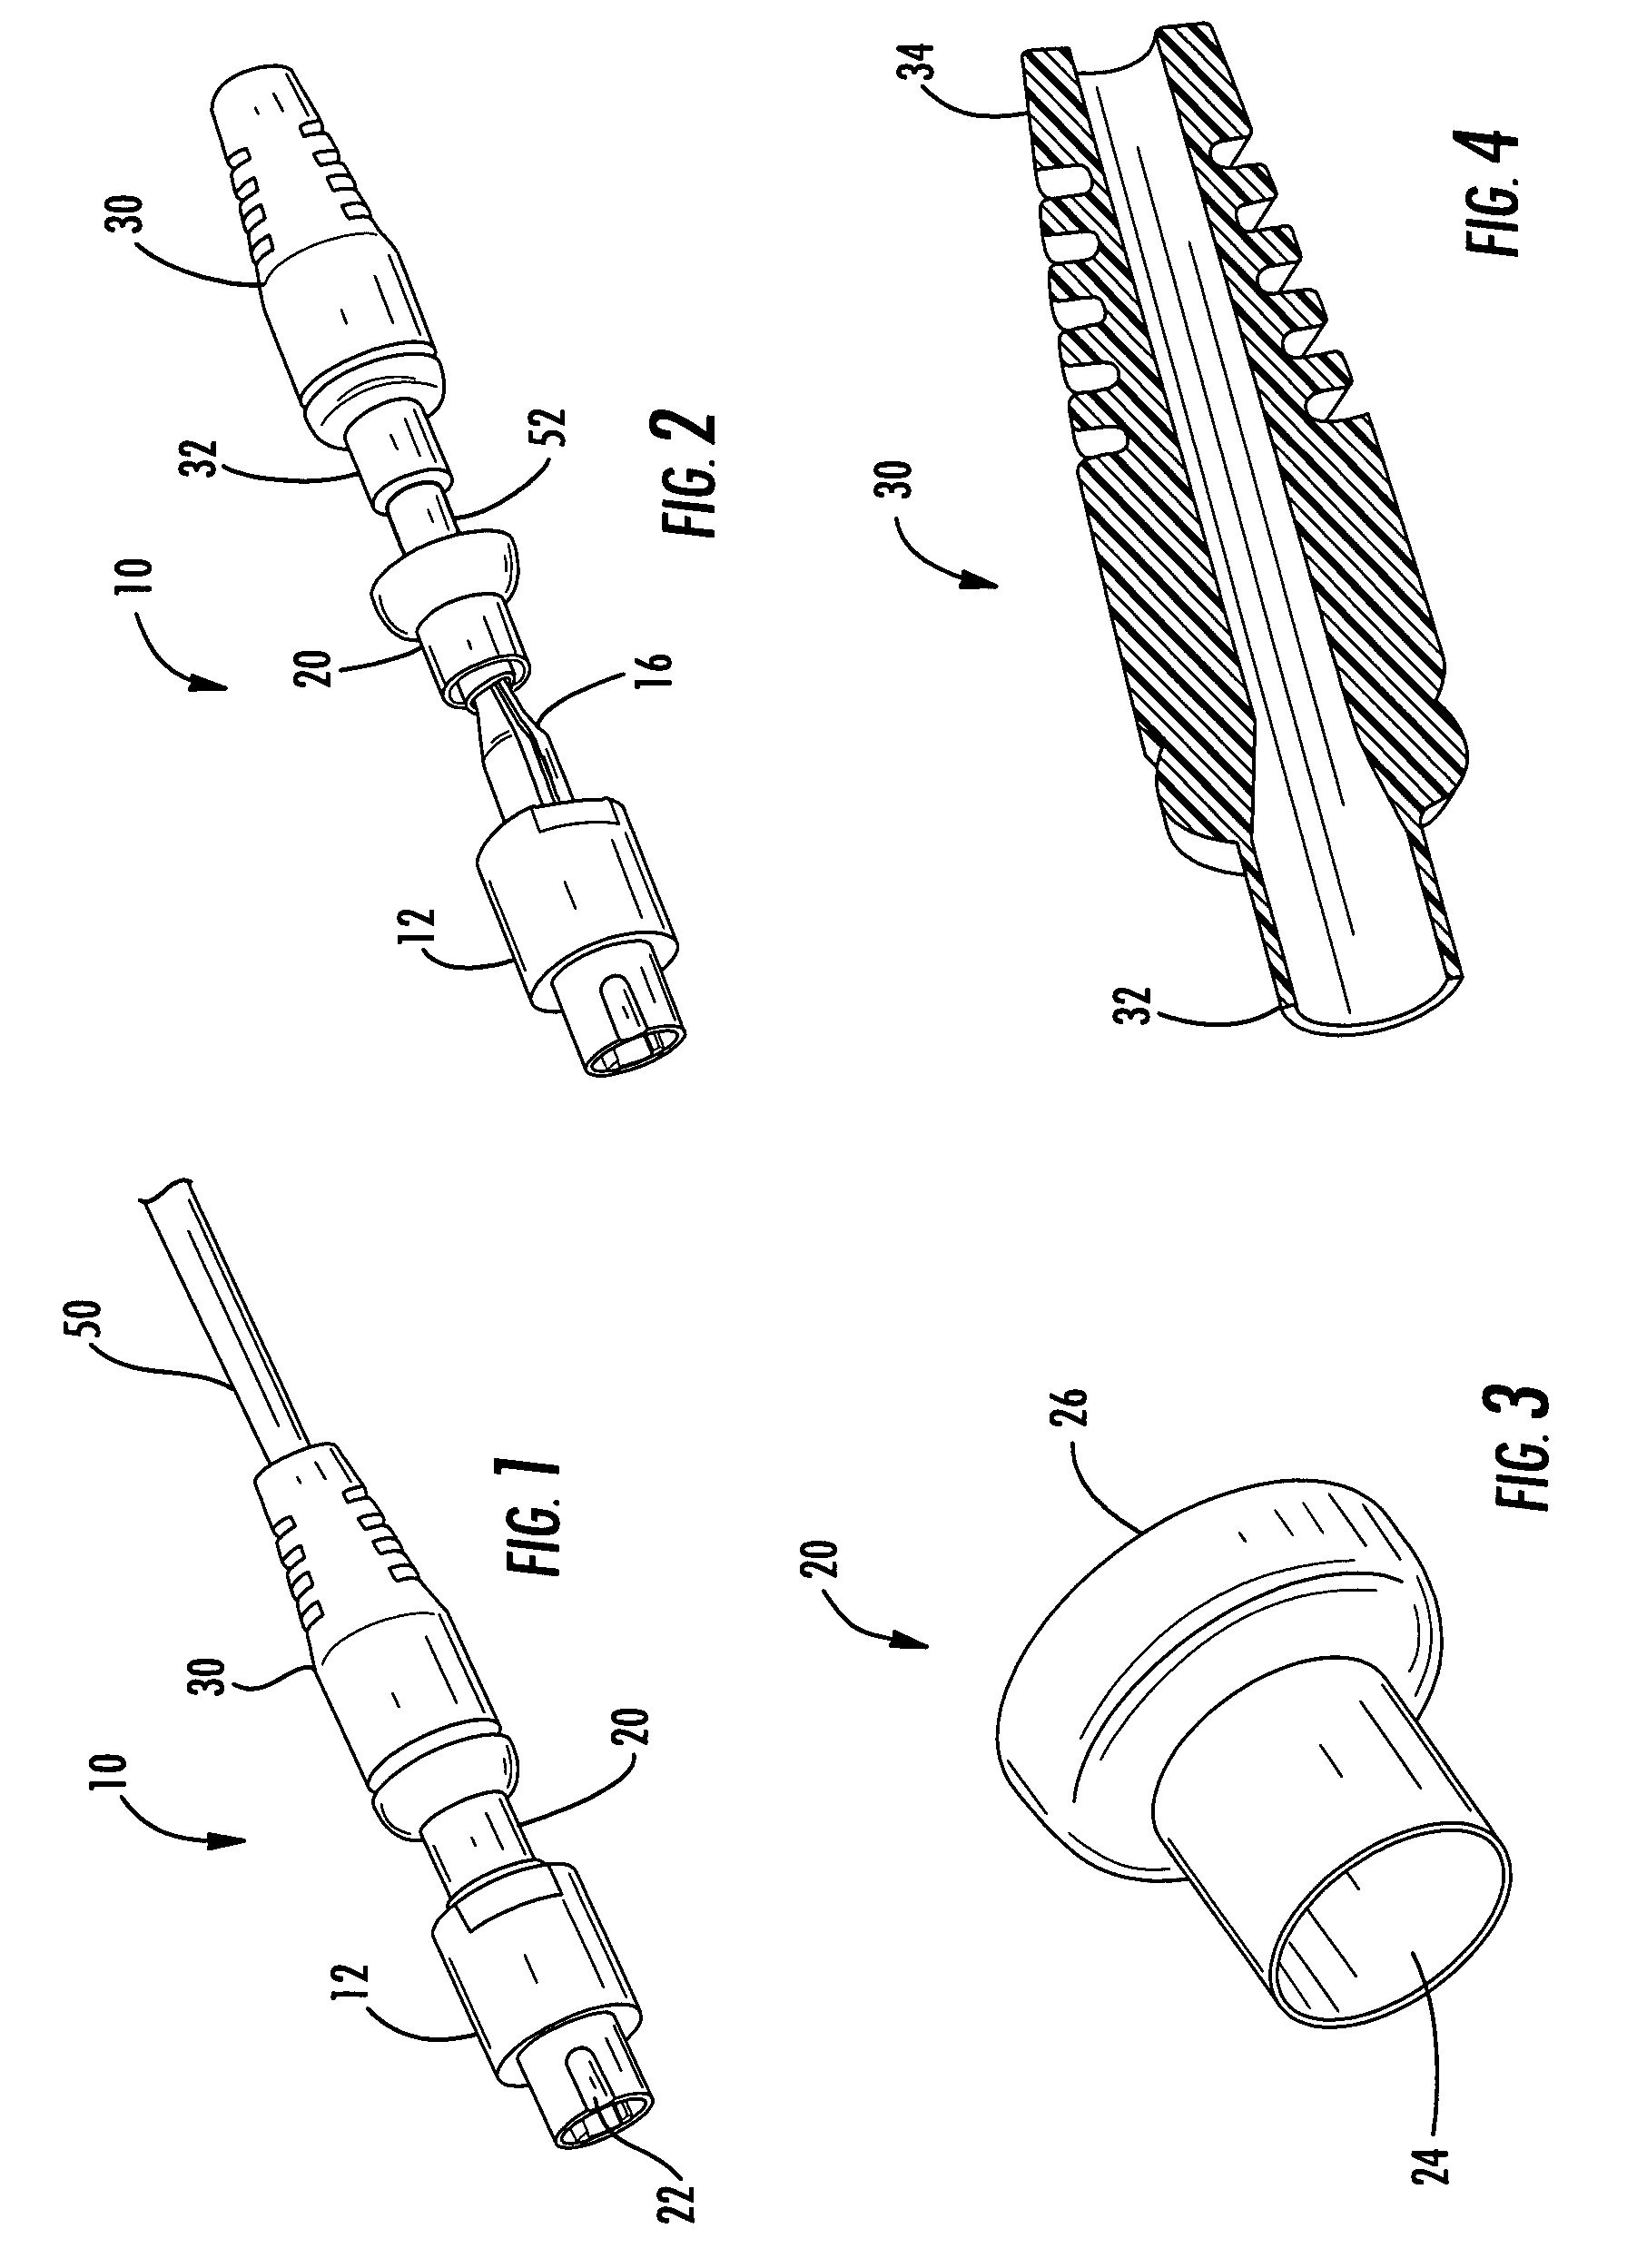 Fiber optic plug assembly with boot and crimp band